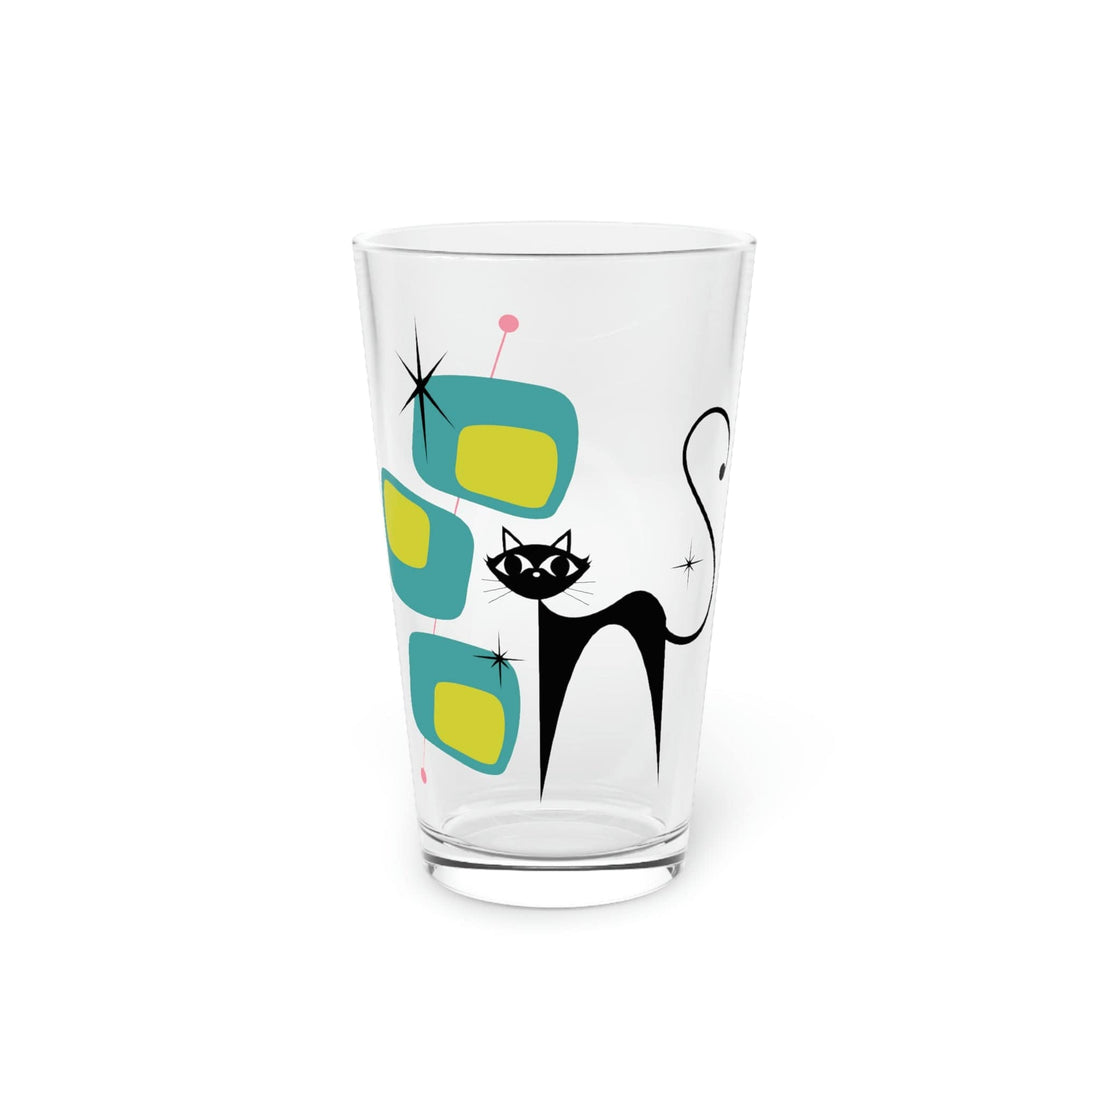 Kate McEnroe New York Atomic Cat Retro Kitsch Pint Glass, 16oz Mid Century Modern Beer Glass, MCM Glass, Beer Glassware Gifts, Party Drinkware, Cocktail GlassBeer Glasses21482491883001381578